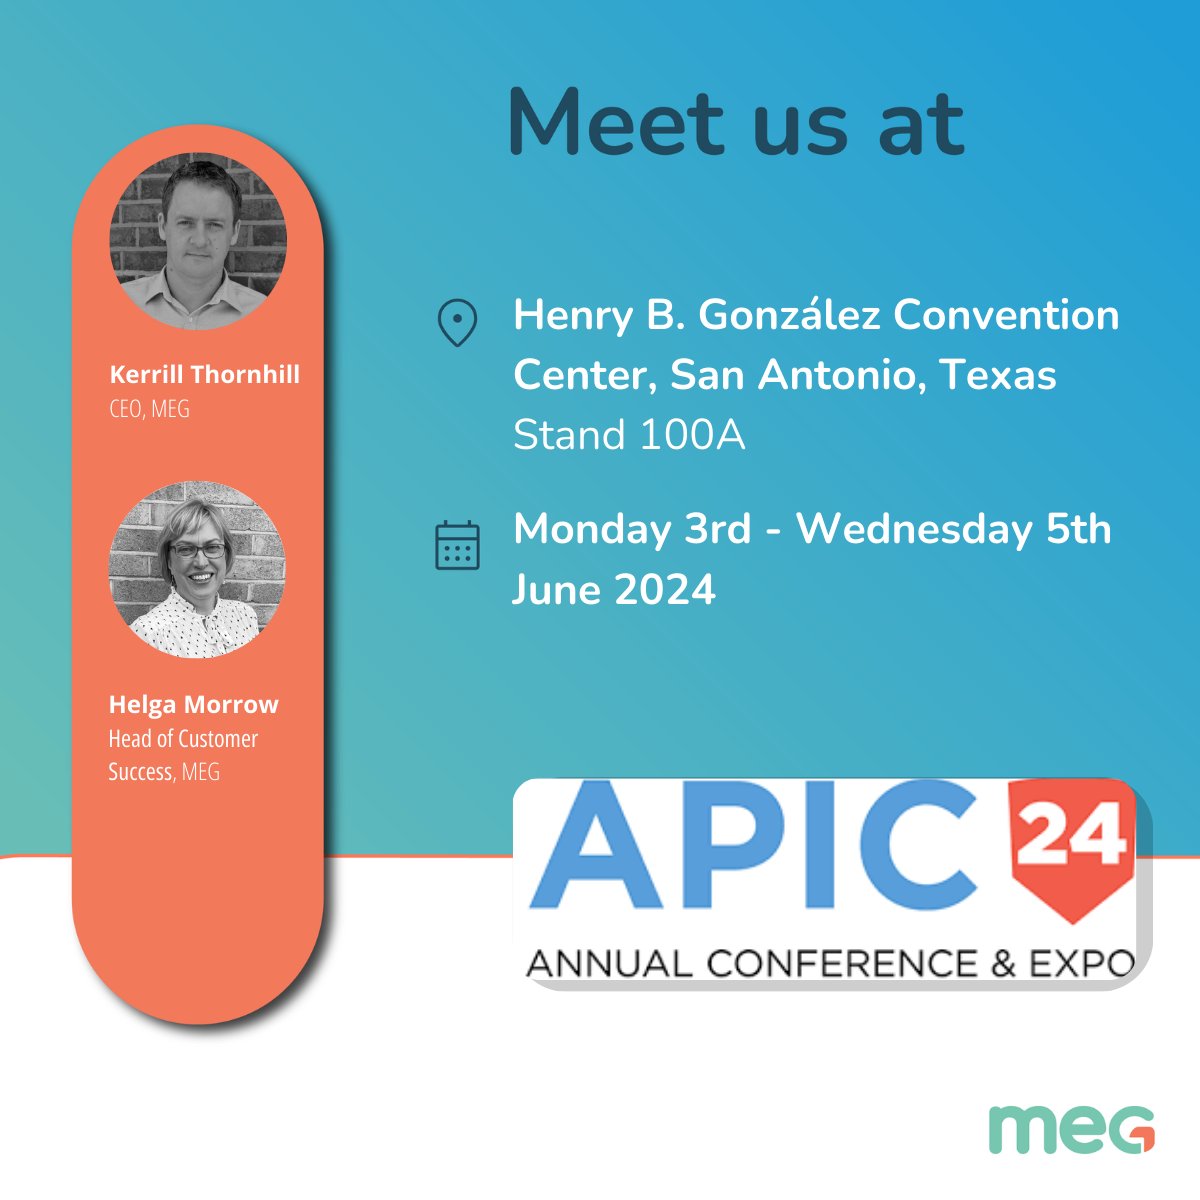 📣We're excited to be 1st time exhibitors @APIC 2024 in Texas this June. Infection Preventionists, if you're attending, stop by the MEG stand to meet our team & learn how our digital Audit & Compliance module is revolutionizing IP&C in healthcare organizations in 20 countries. 🤝